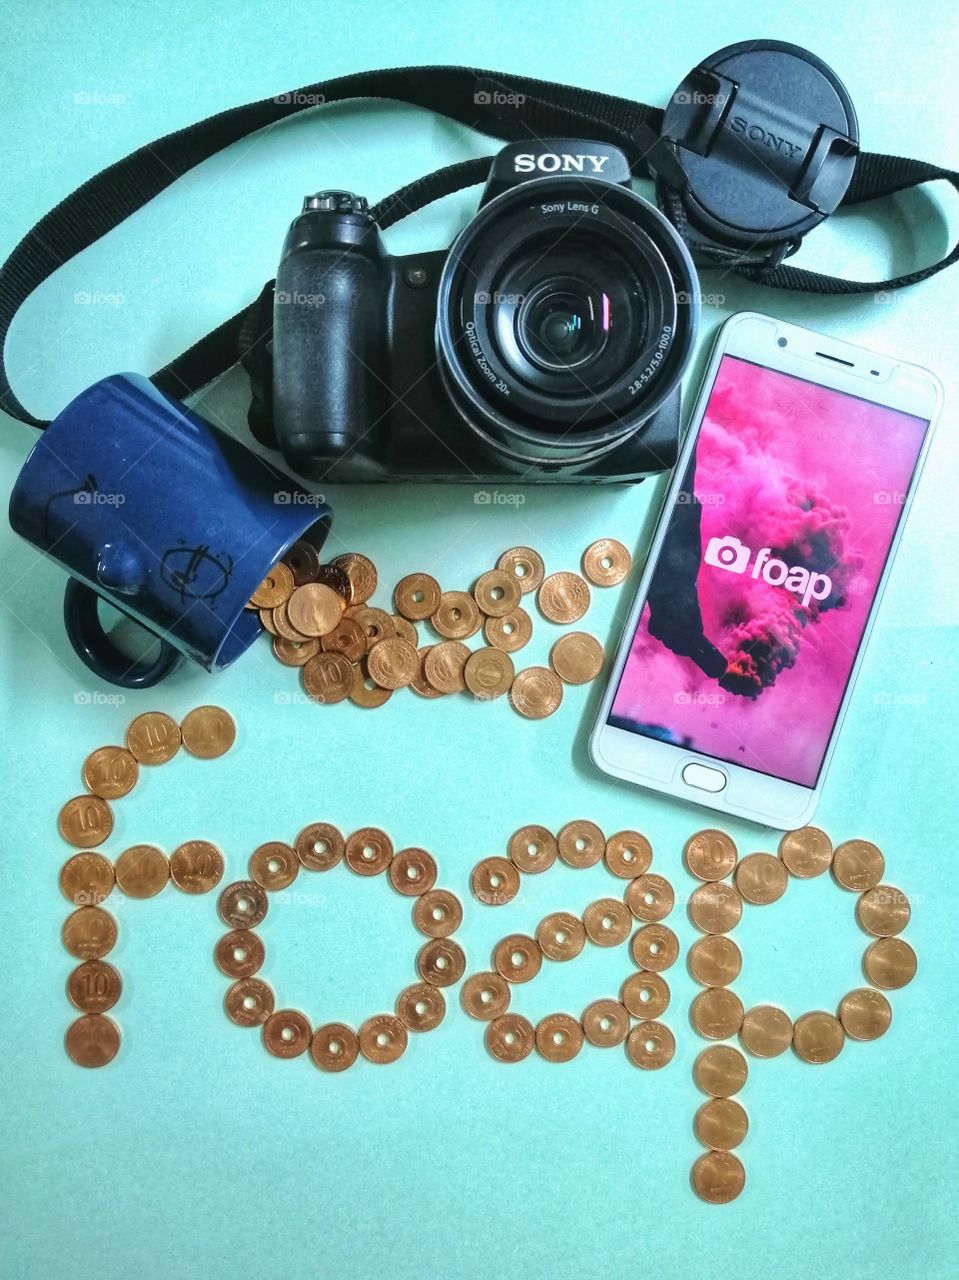 A picture that shows the foap word formed with coins and a mobile phone and a digital camera that shows you can earn money with your photos.